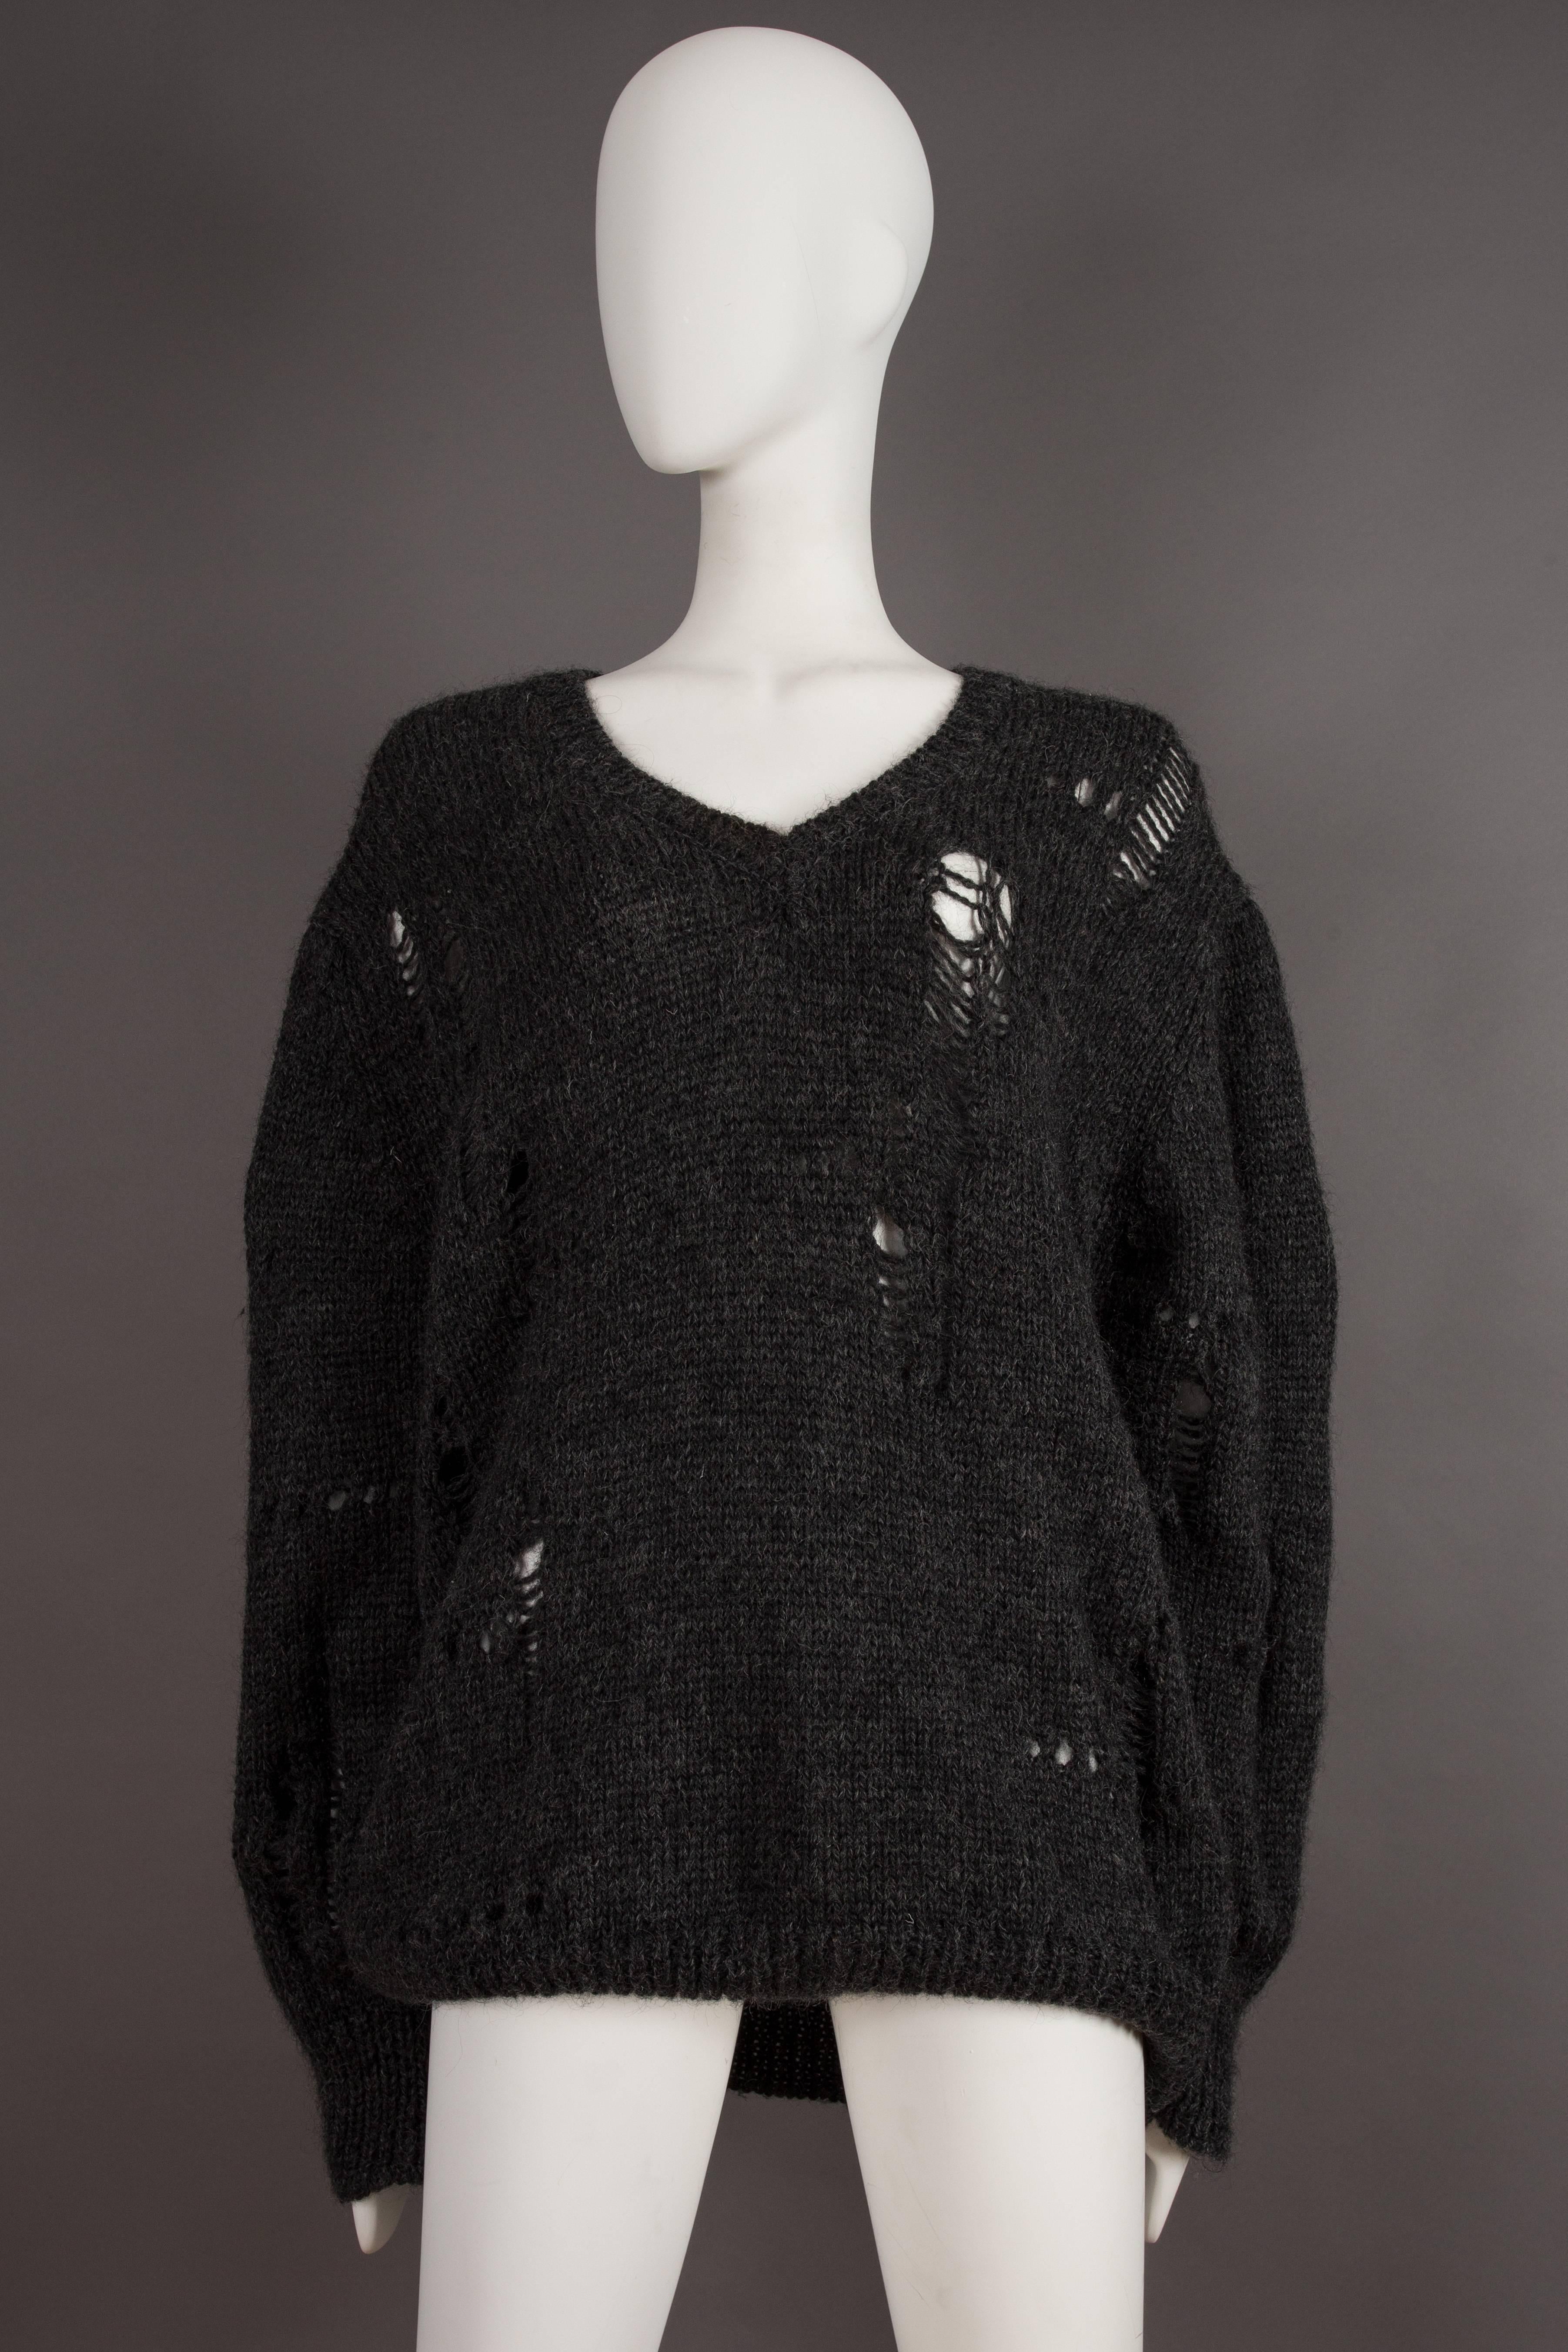 Extremely rare COMME des GARCONS oversized knitted sweater decorated with randomly placed holes, circa 1982. 

This sweater is typical of the predominantly deconstructed and distressed collections produced during the early 1980s by Rei Kawakubo